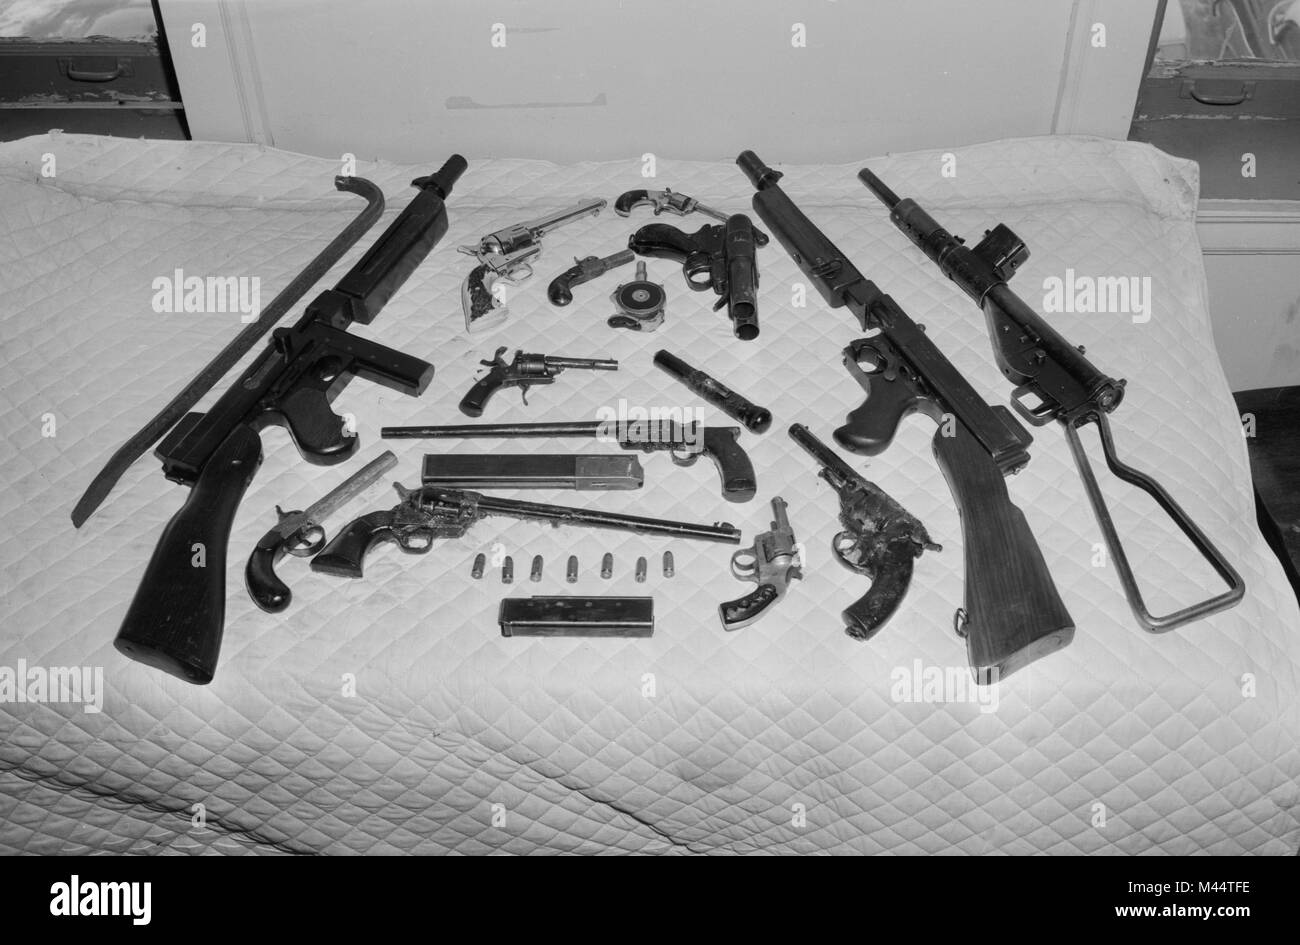 Police haul of illegal guns and weapons after a raid in Chicago, ca. 1957. Stock Photo